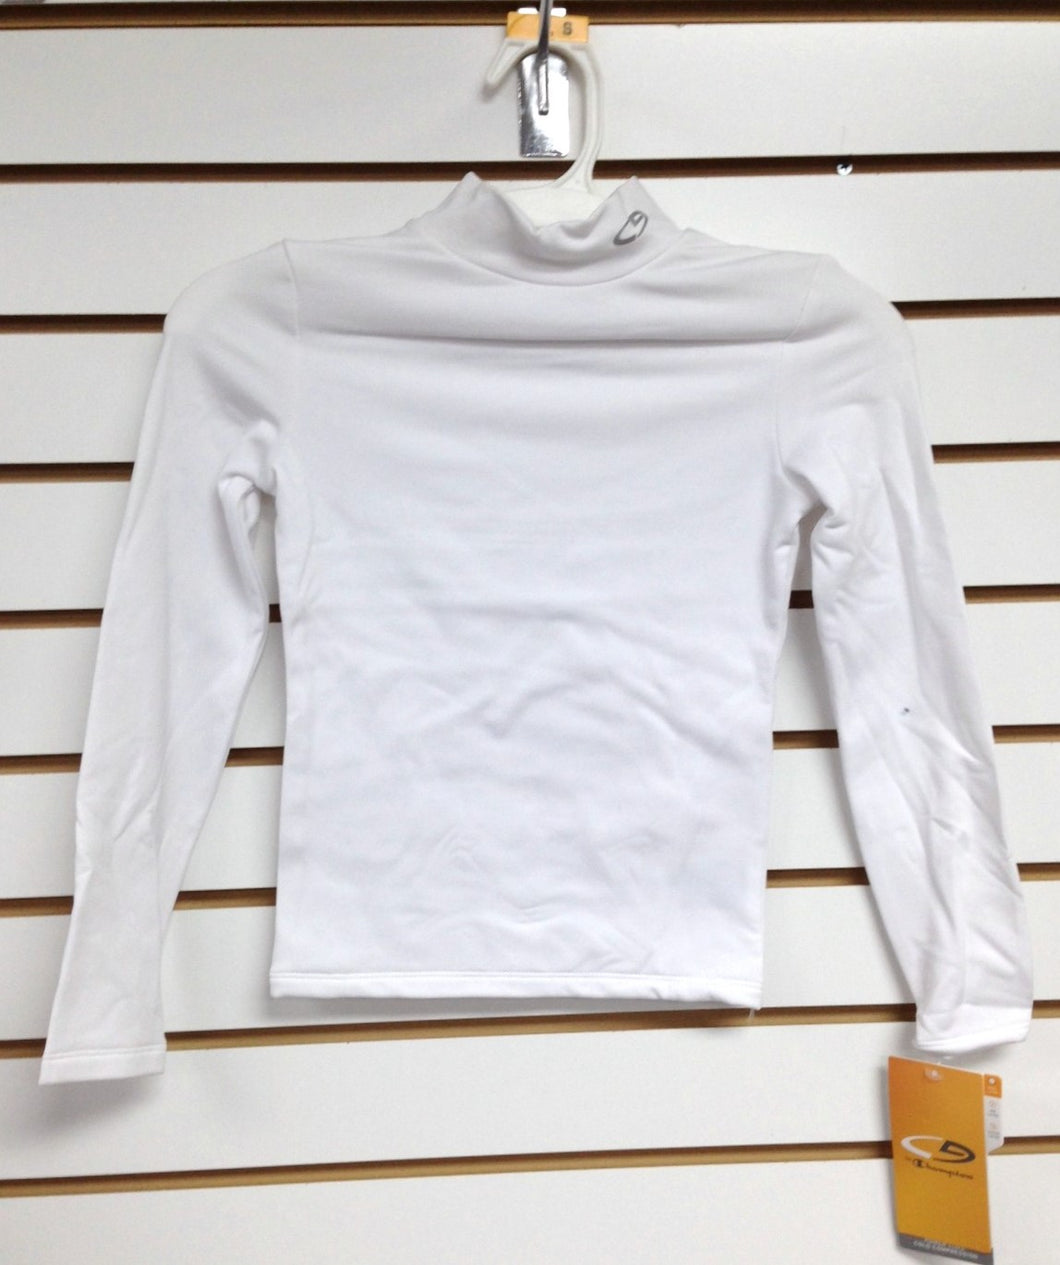 C9 by Champion Mock Tee Style S9227Z